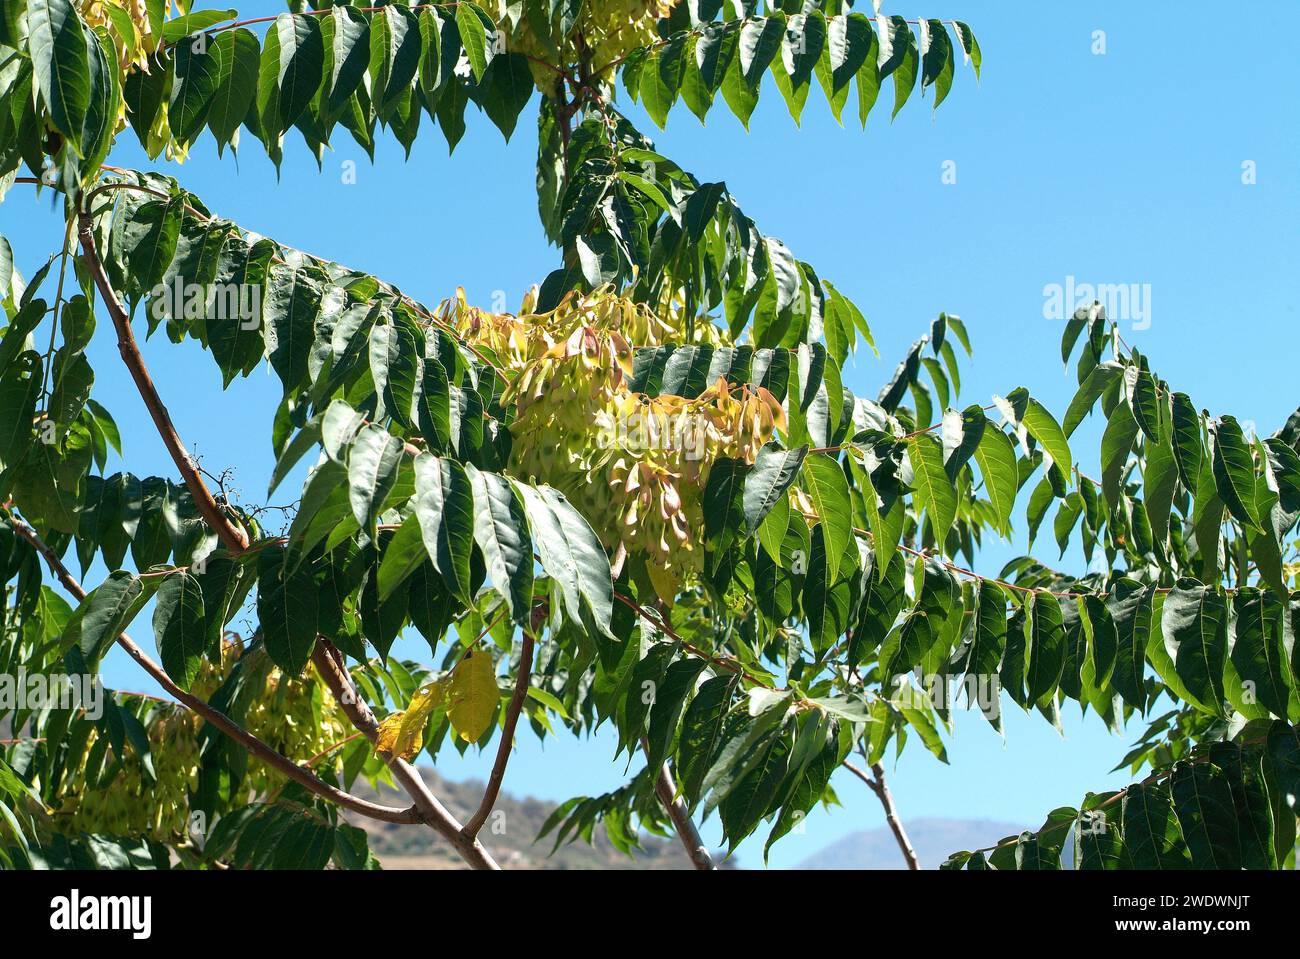 Tree of heaven (Ailanthus altissima) is a deciduous tree native to China and naturalized in others temperate regions of the world. Fruits and leaves d Stock Photo